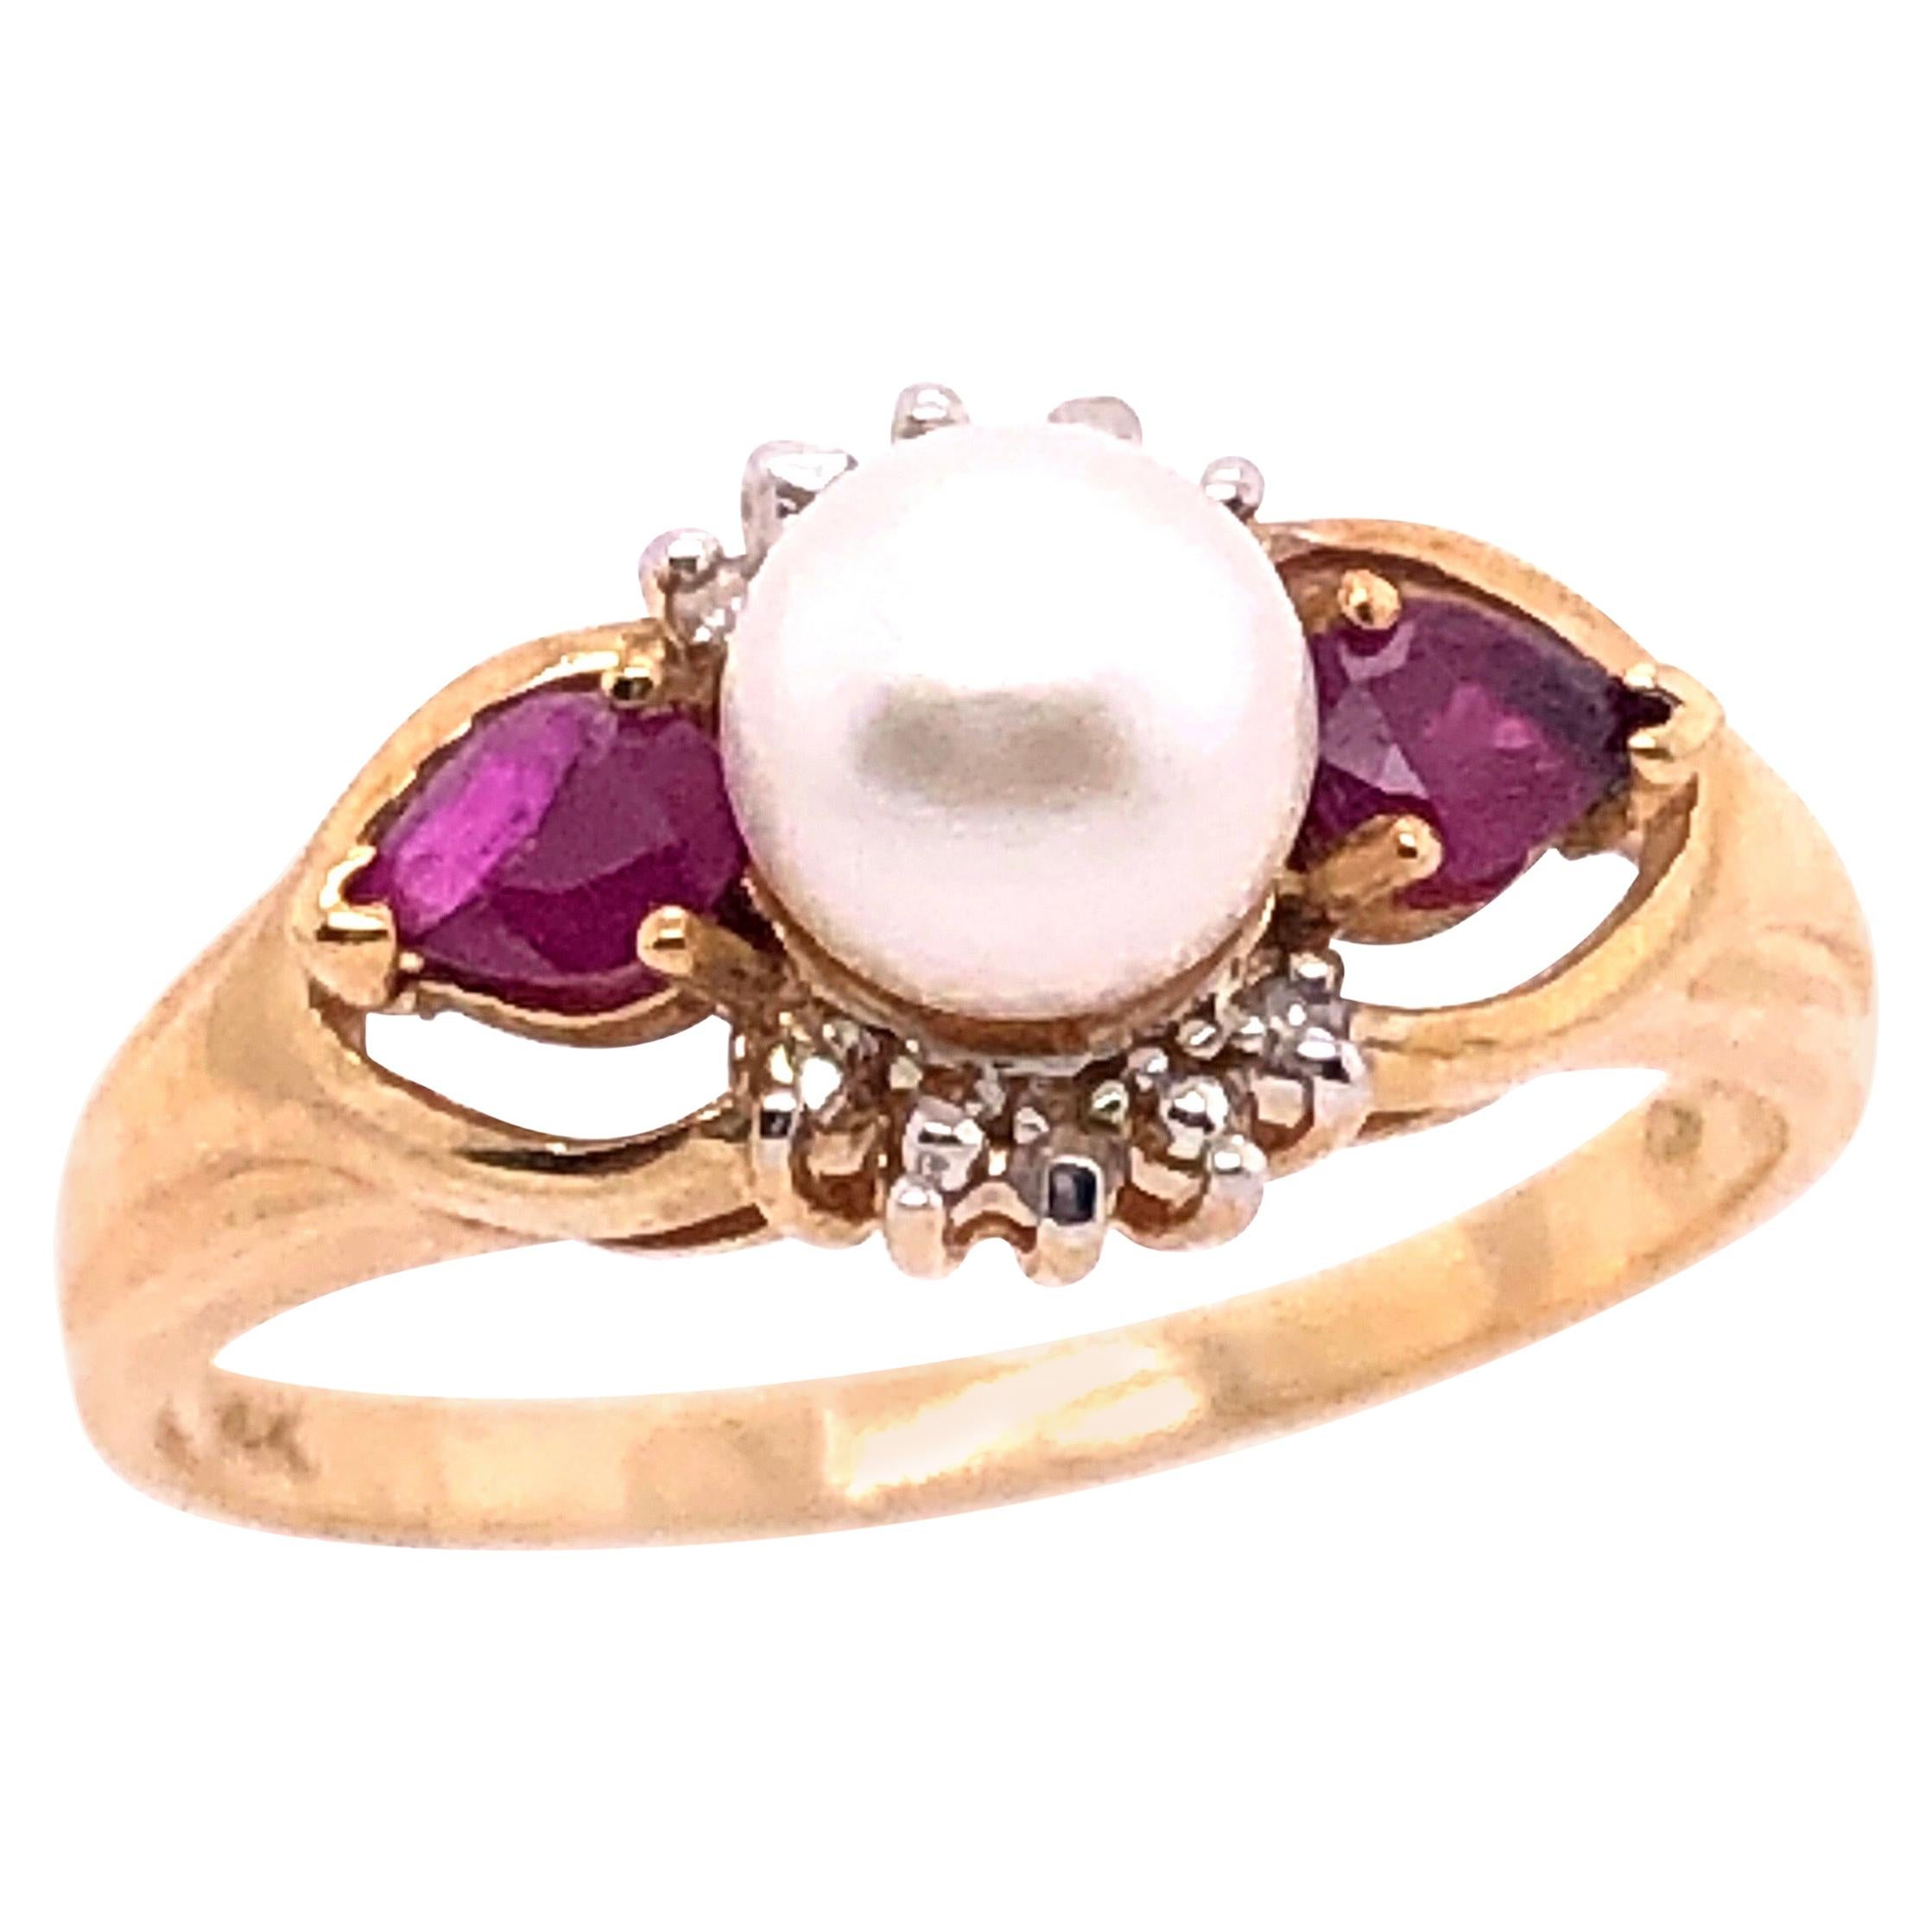 14 Karat Yellow Gold Pearl Solitaire Ring with Ruby and Diamond Accents